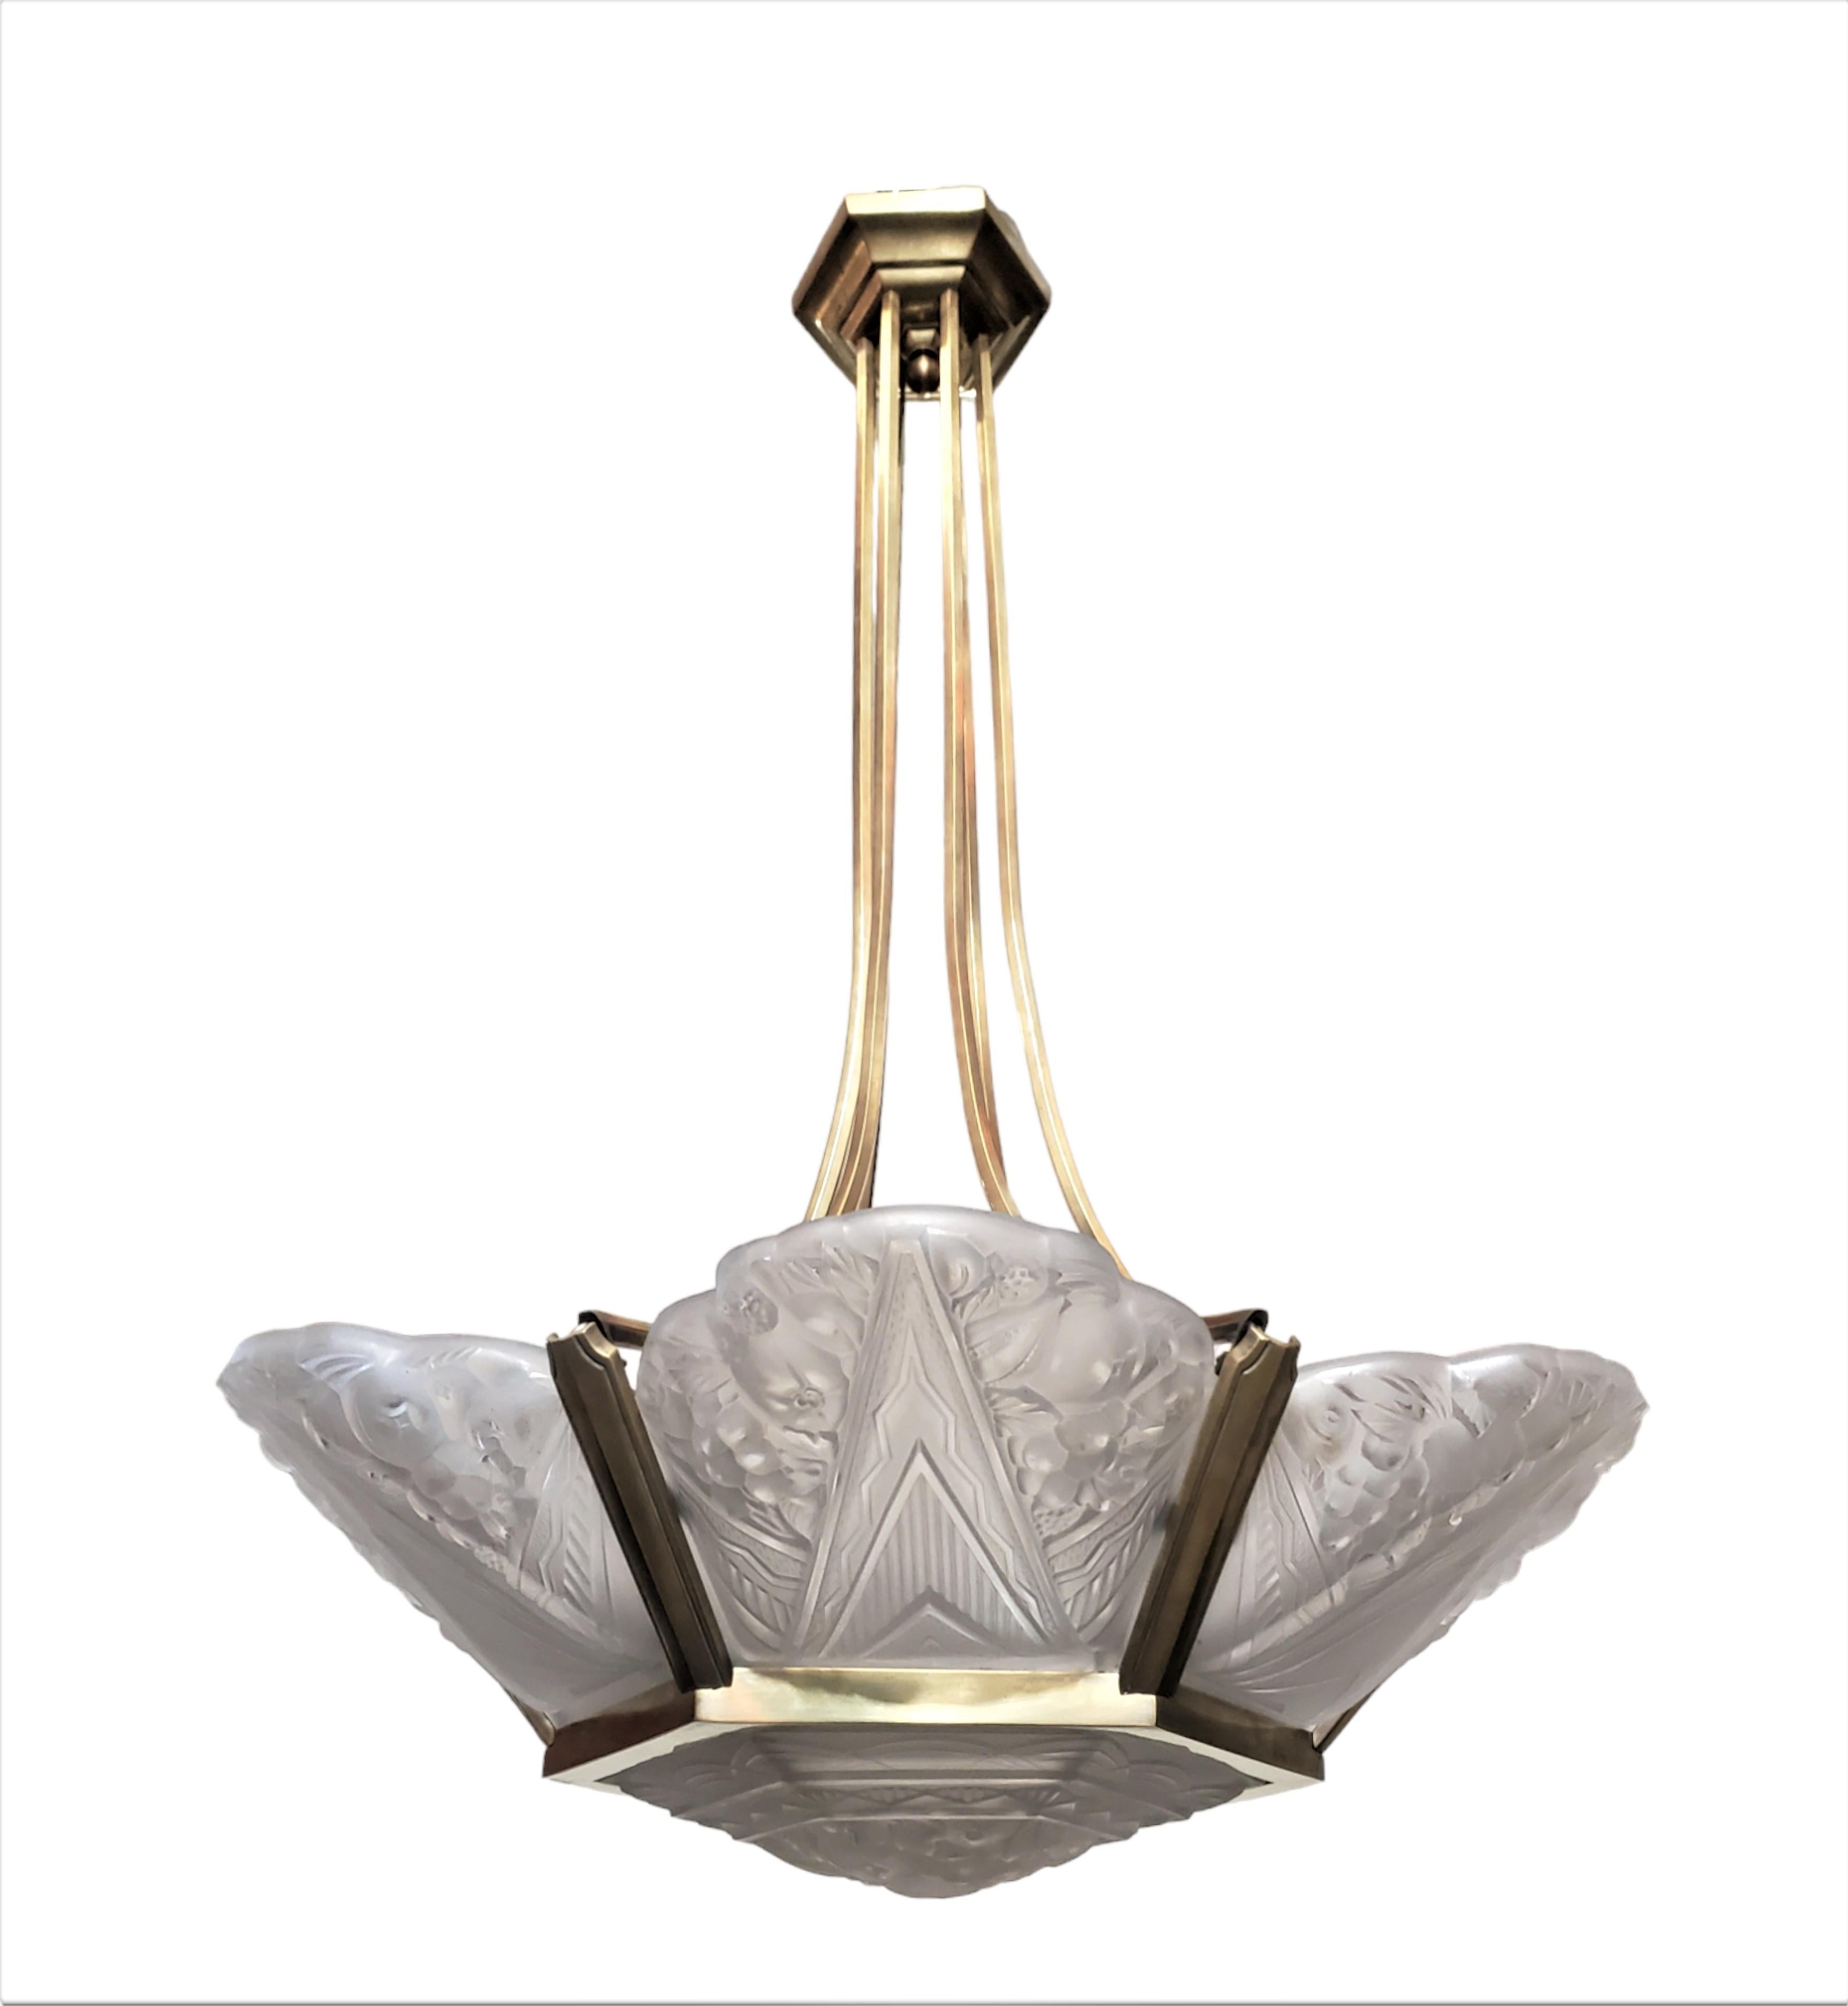 
A fine and authentic French Art Deco period chandelier featuring a blossoming design with six frosted art glass panels and a hexagonal center glass.
 Attributed to Sabino. (Documentation supplied)
The chandelier is elegantly mounted in its original